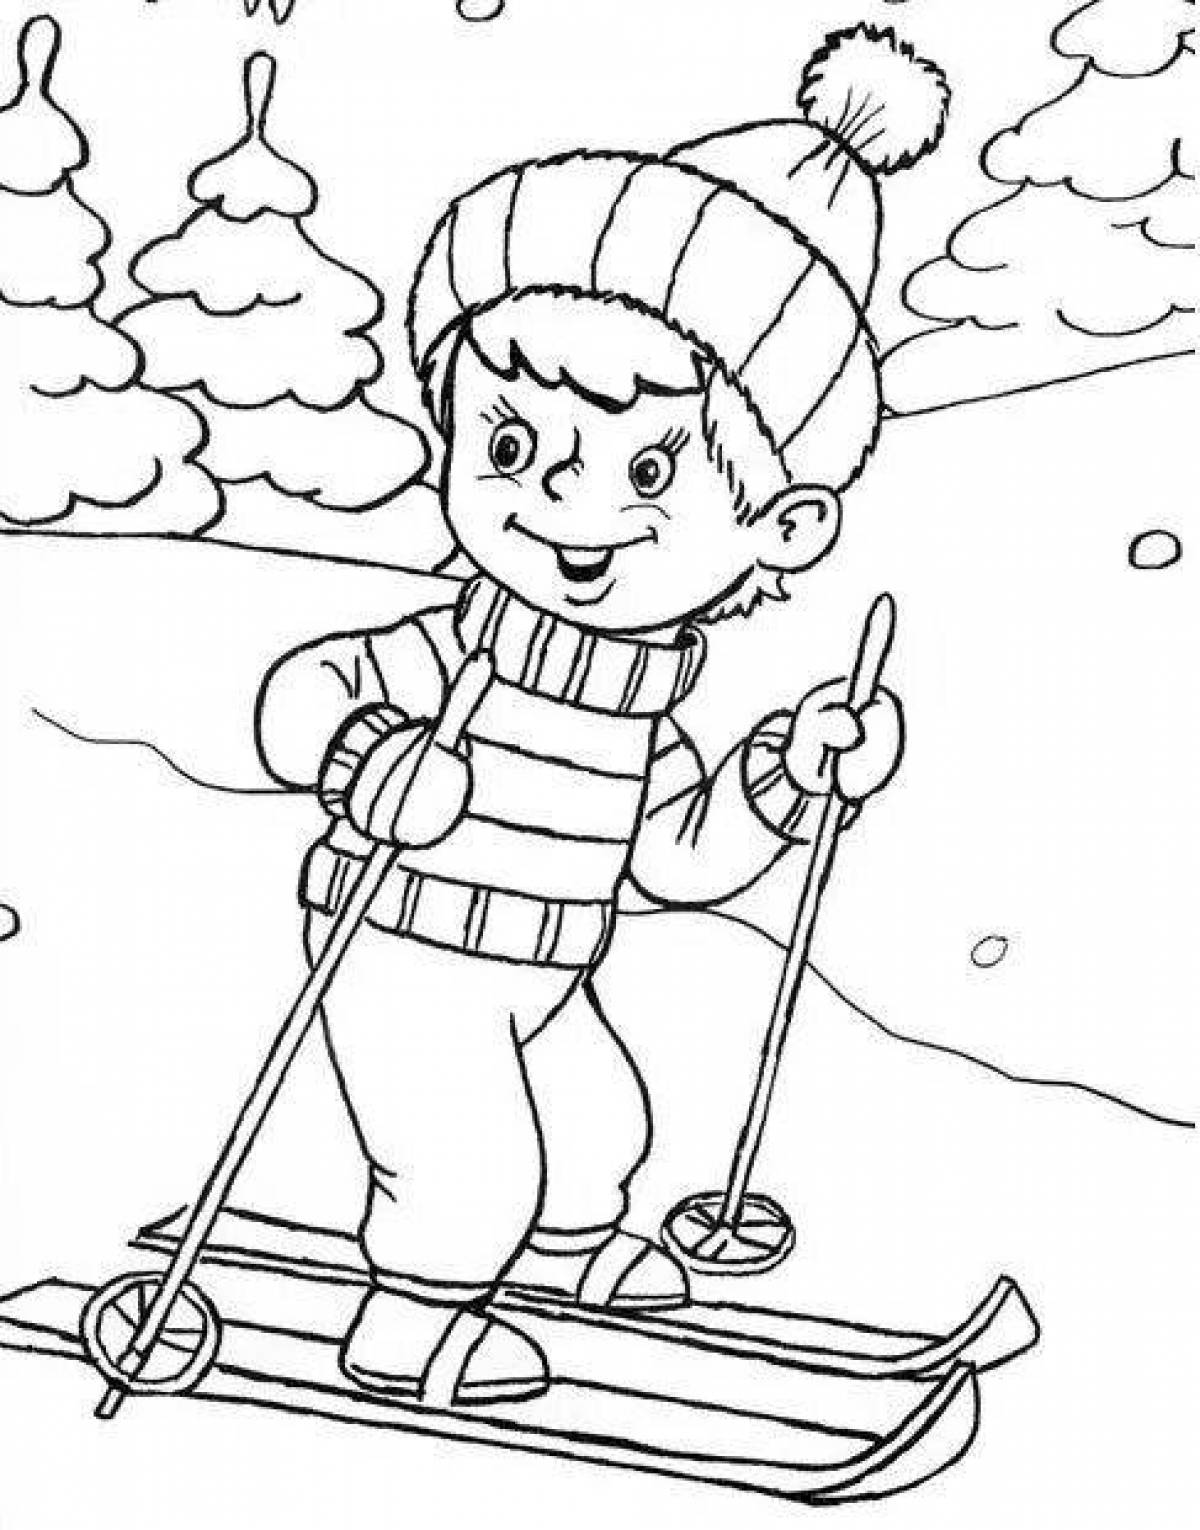 Coloring book for skiers